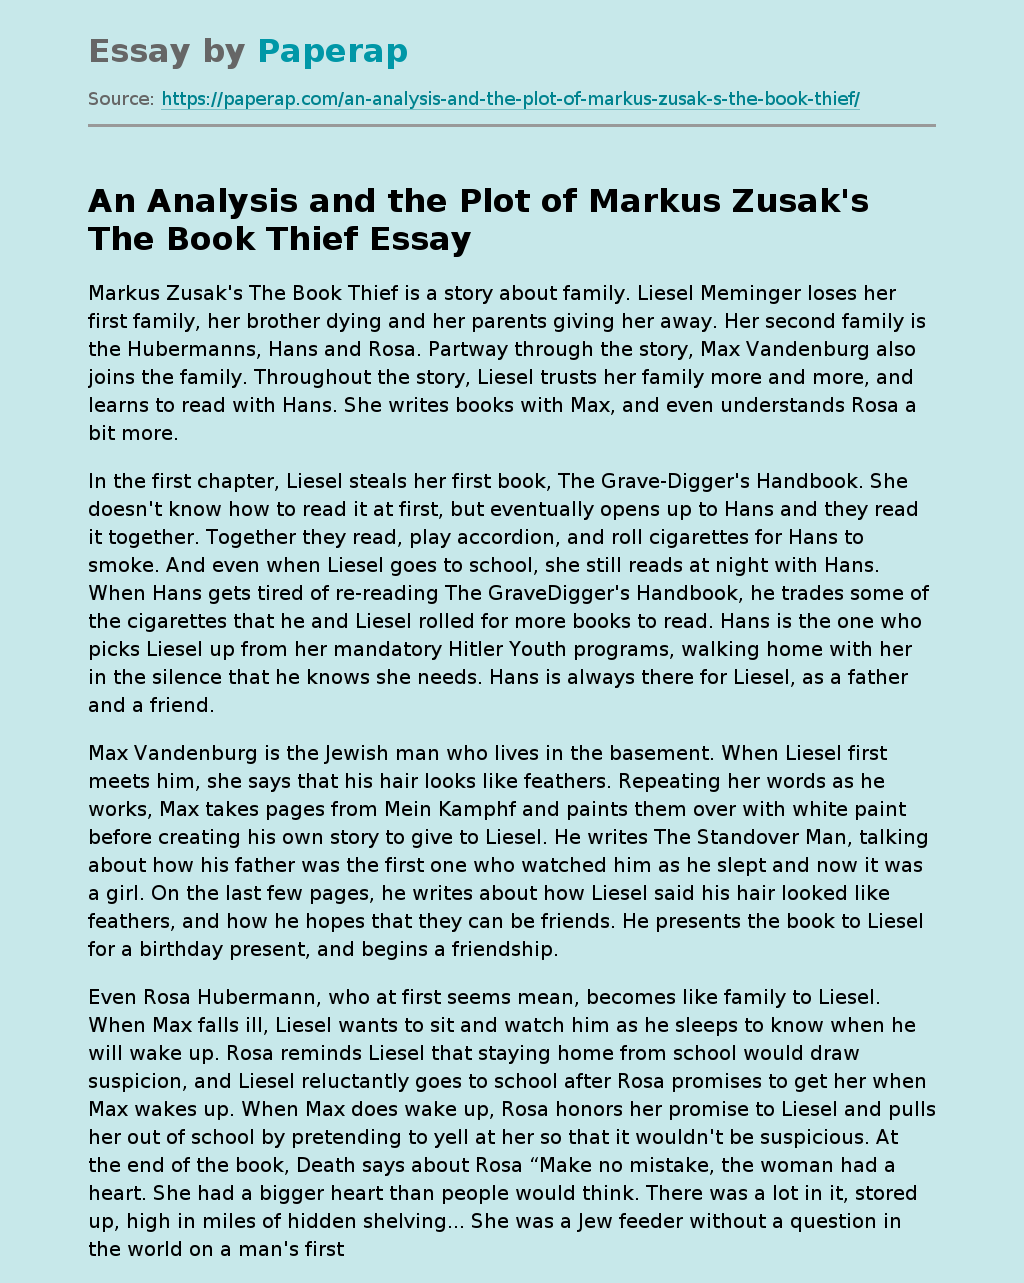 An Analysis and the Plot of Markus Zusak's The Book Thief